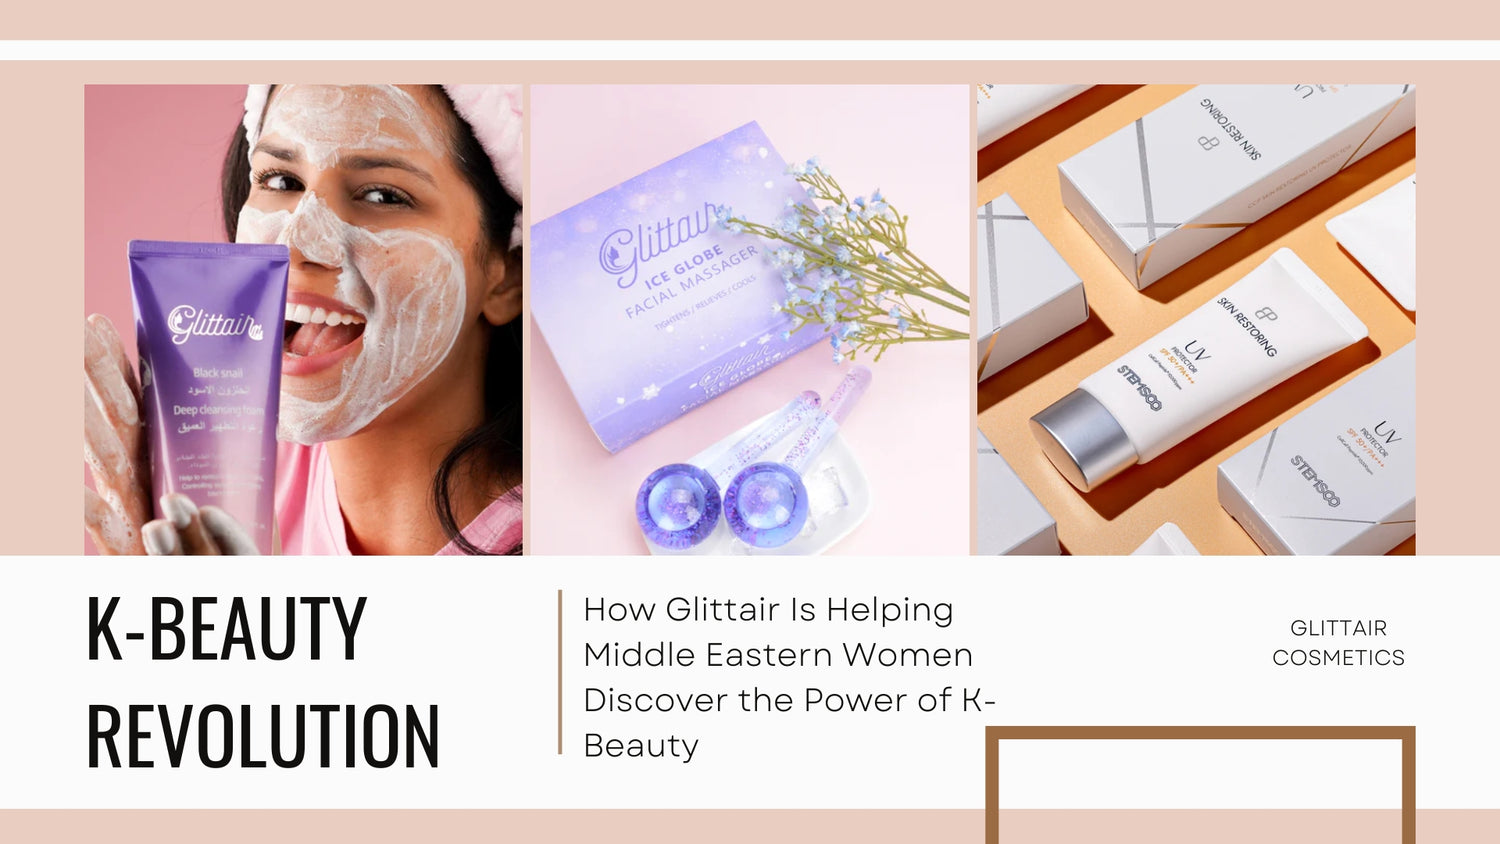 How Glittair Is Helping Middle Eastern Women Discover the Power of K-Beauty